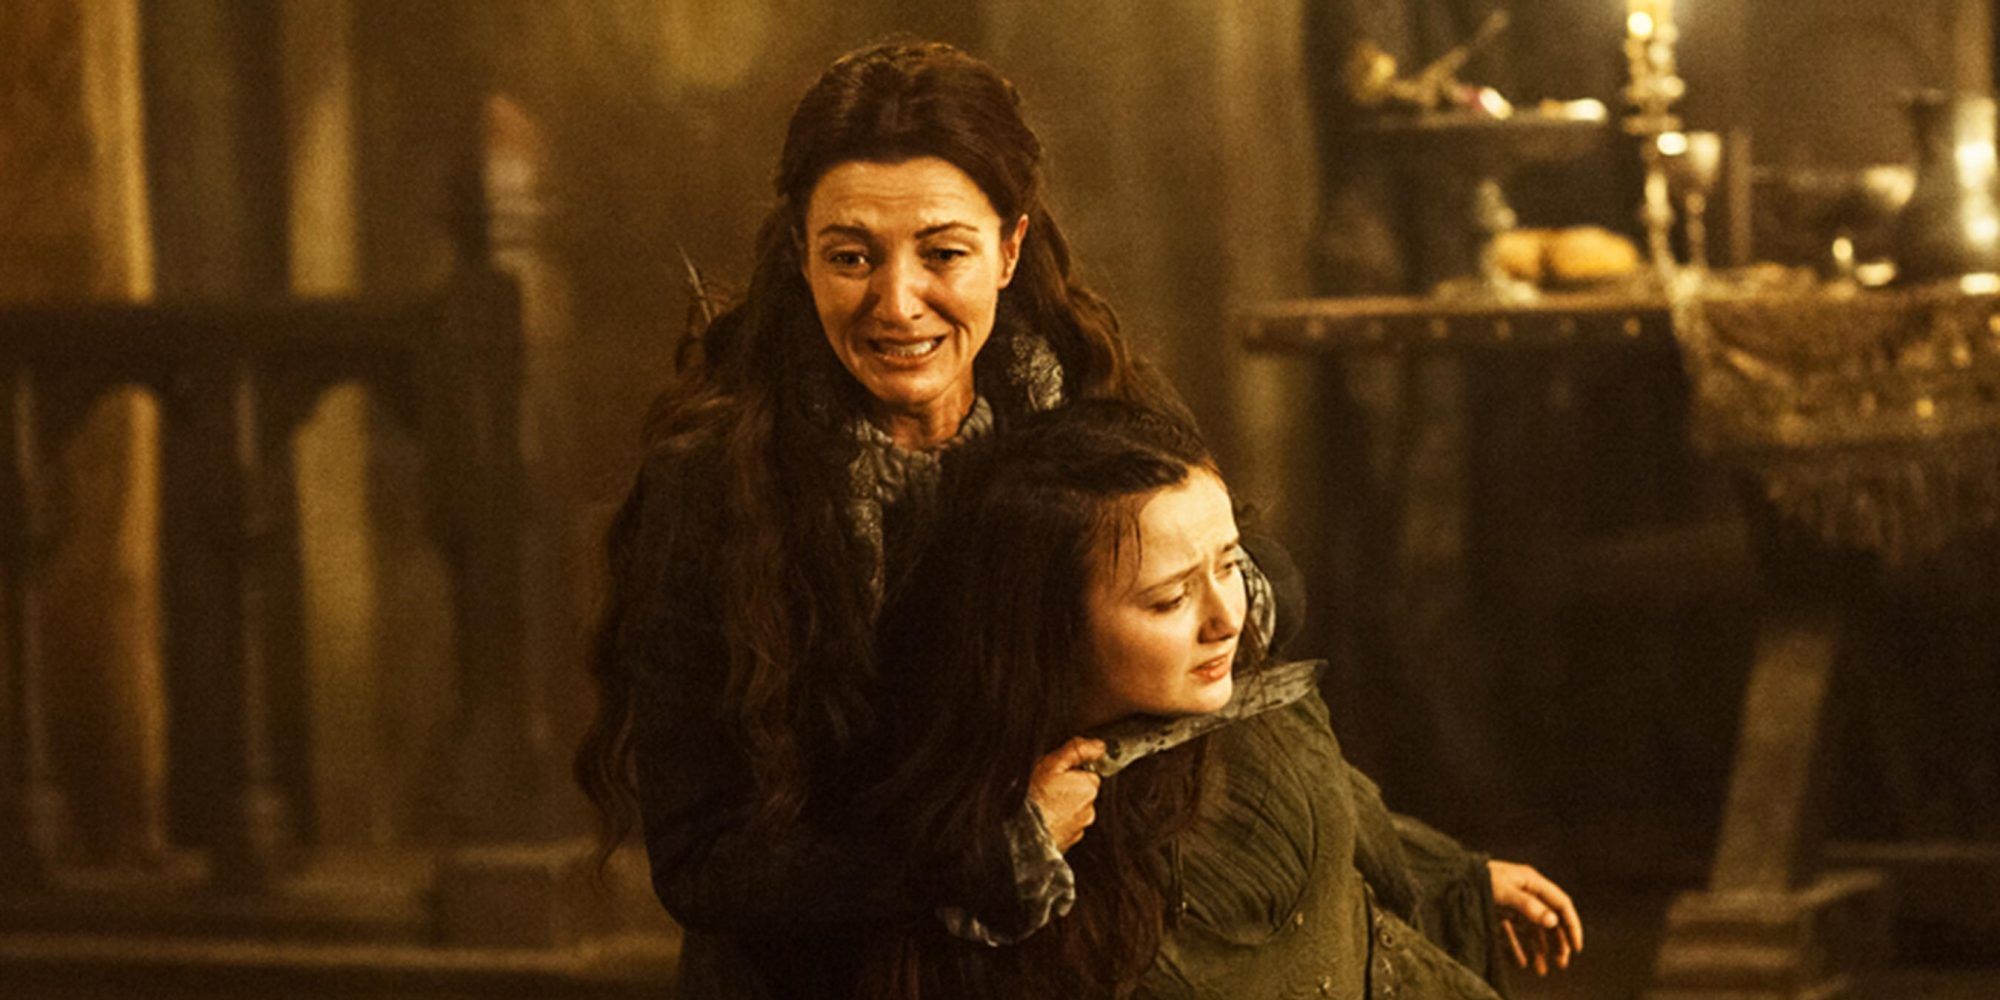 Catelyn Stark becomes Lady Stoneheart following the events of the red wedding (Game of Thrones)